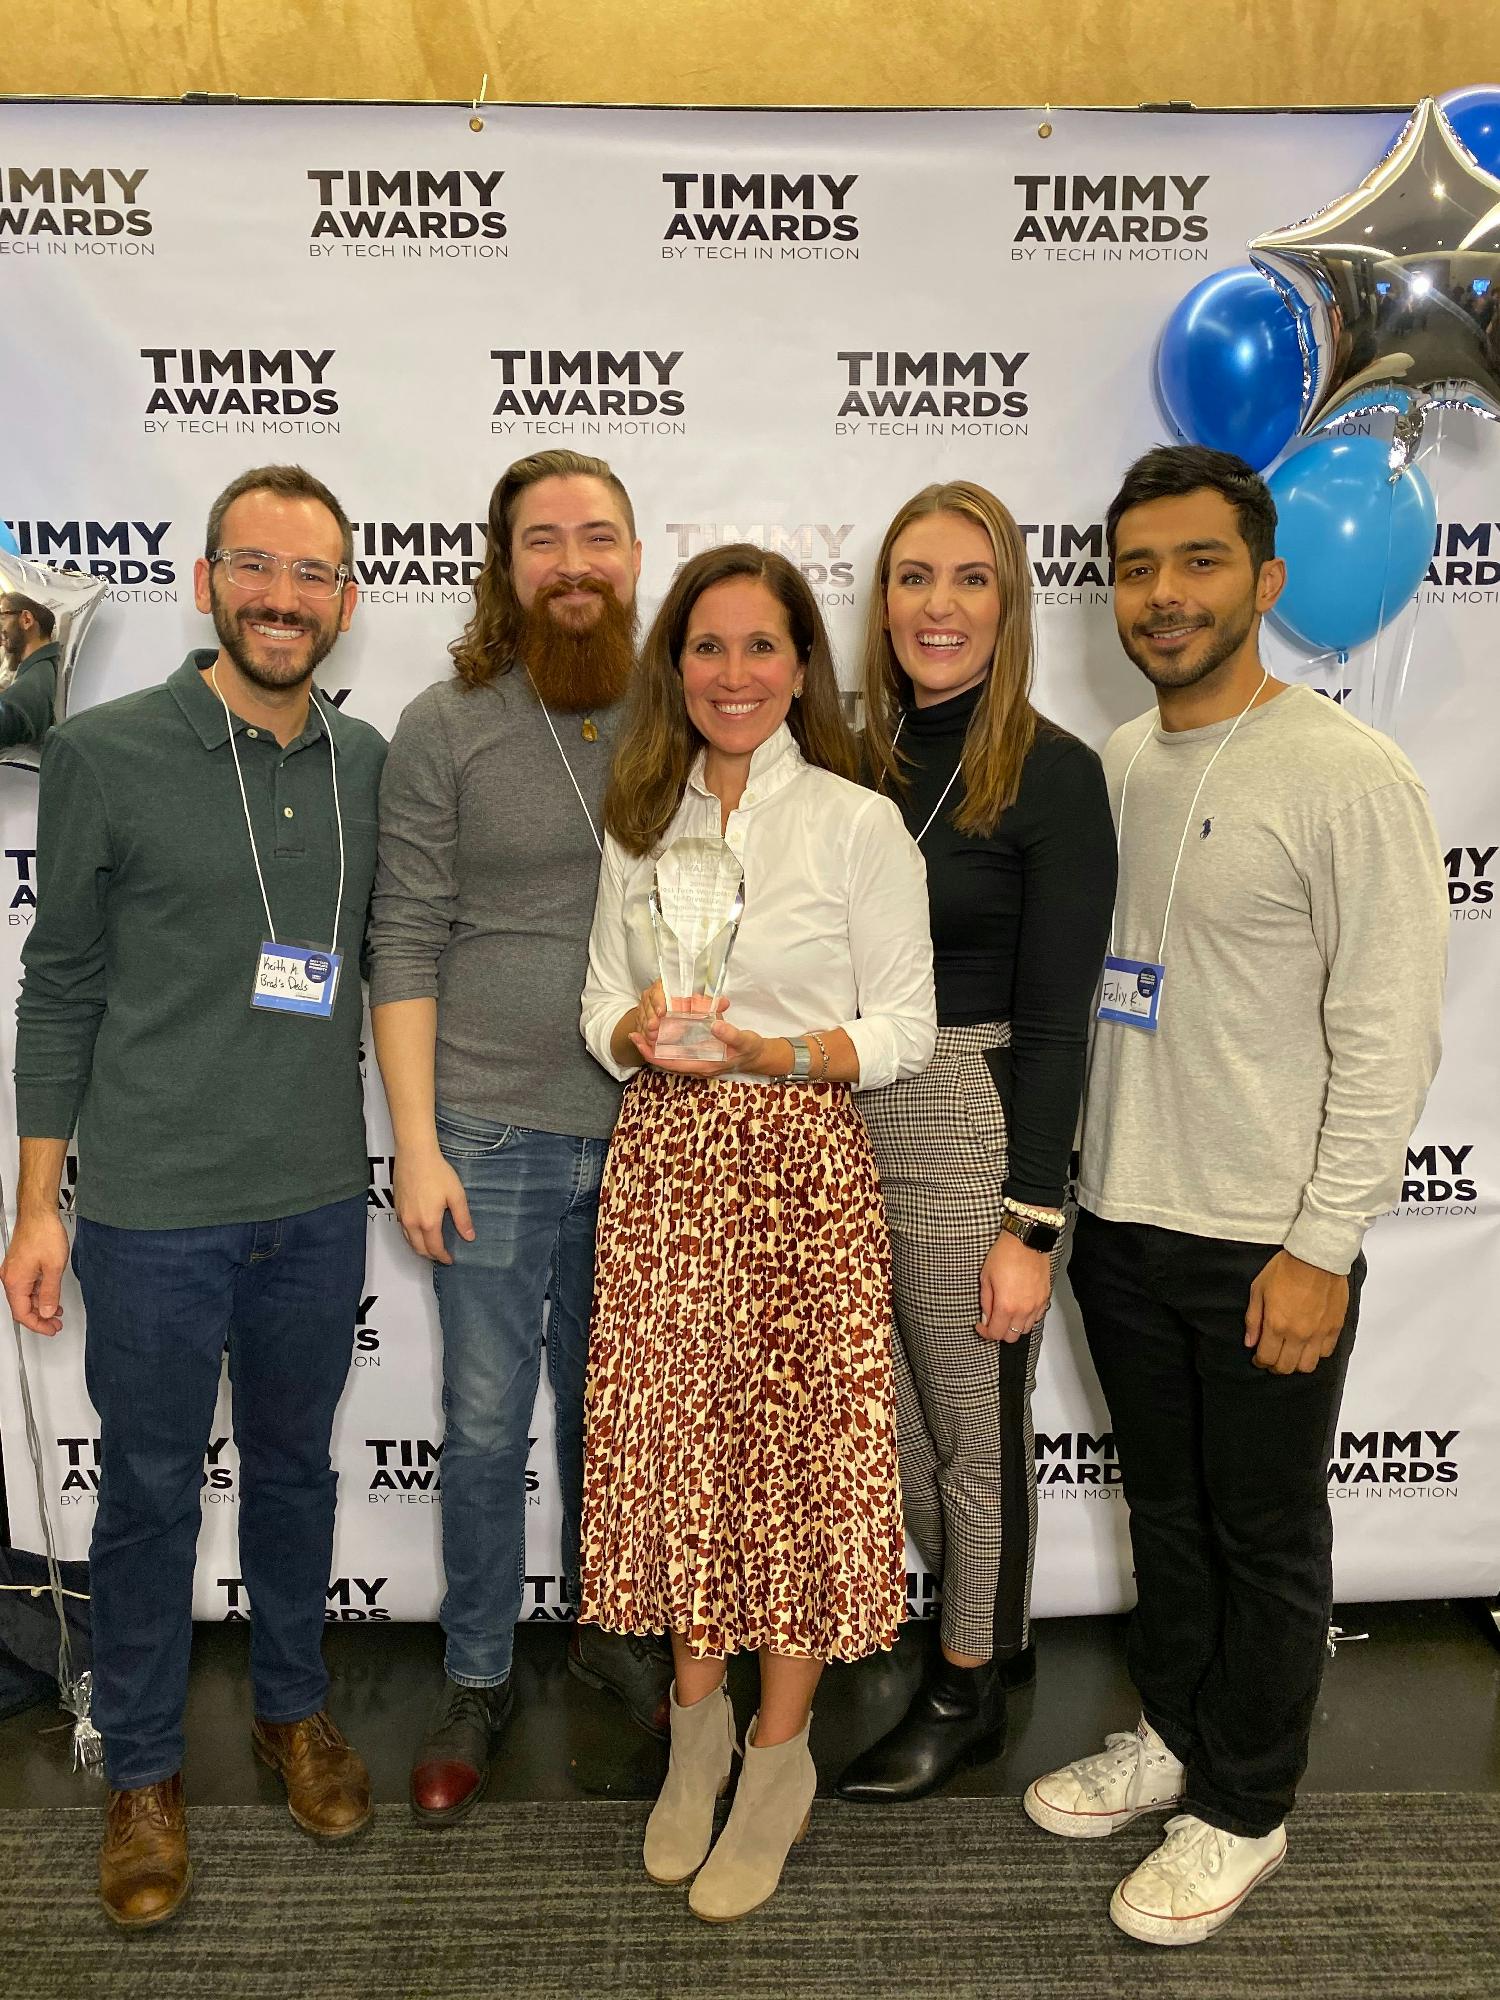 Winning a Timmy Award, for Best Workplace for Diversity.